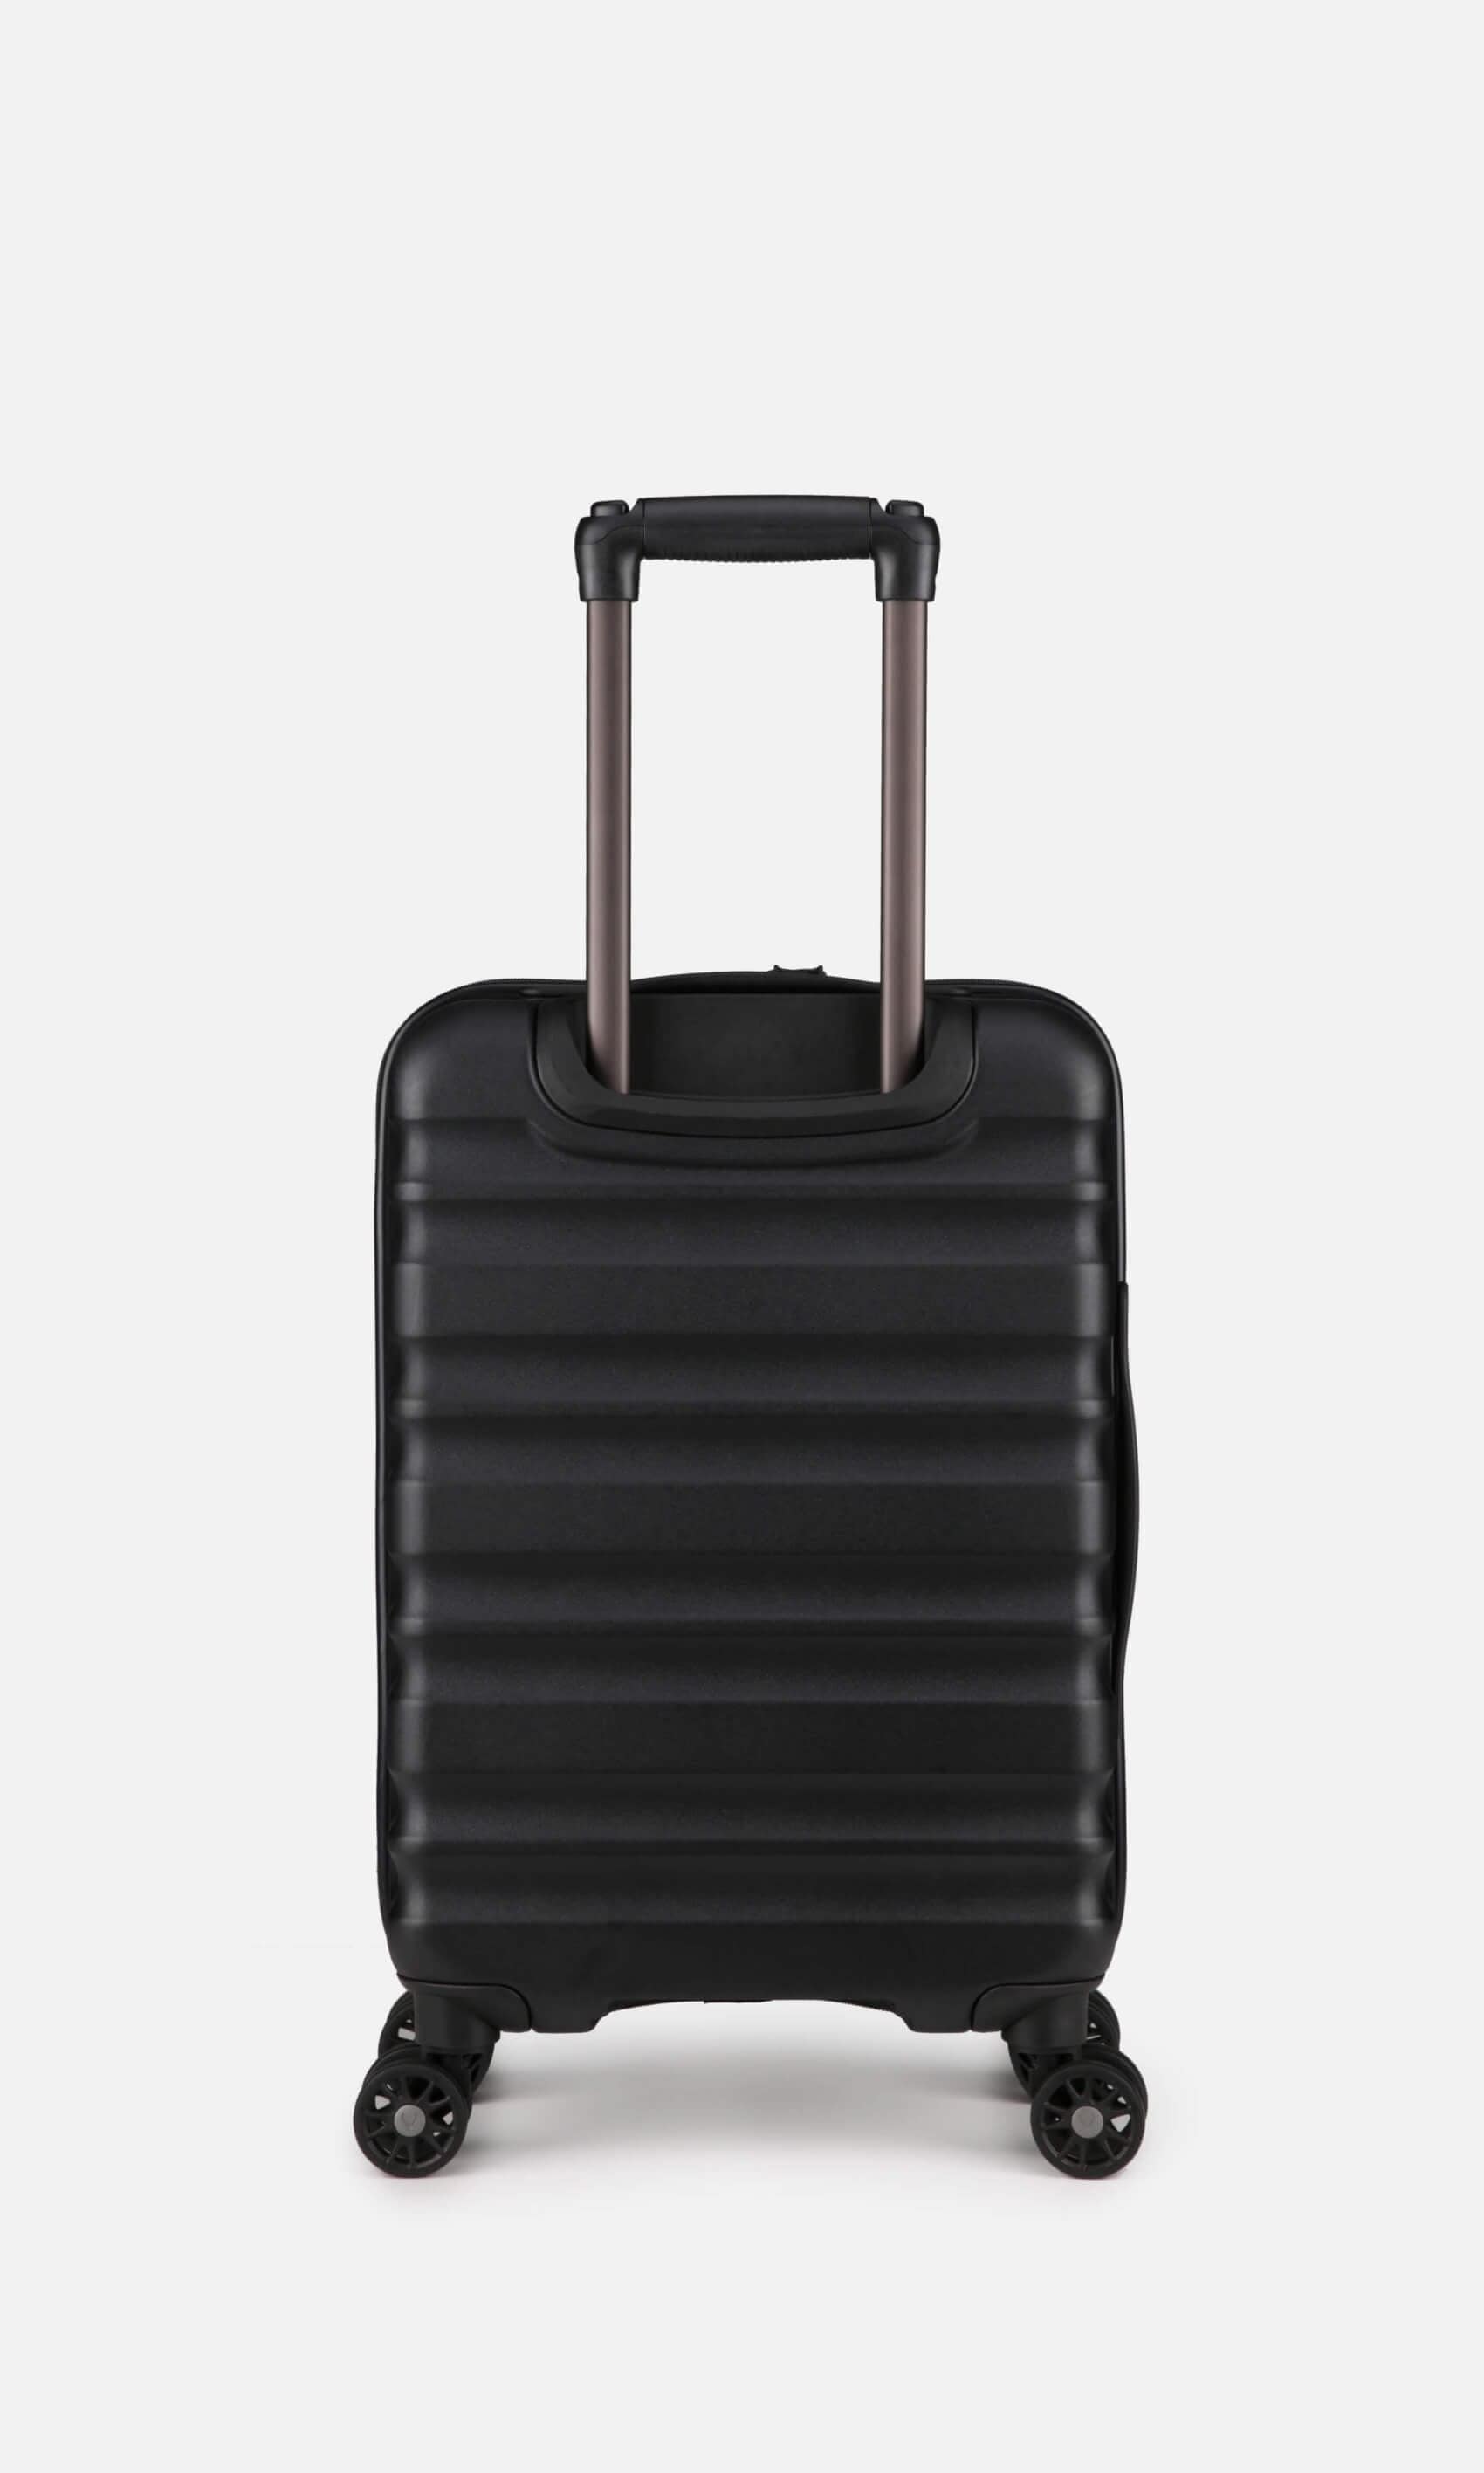 Antler Luggage -  Clifton expandable cabin in black - Hard Suitcases Clifton Expandable Cabin Suitcase Black | Hard Suitcase | Antler UK